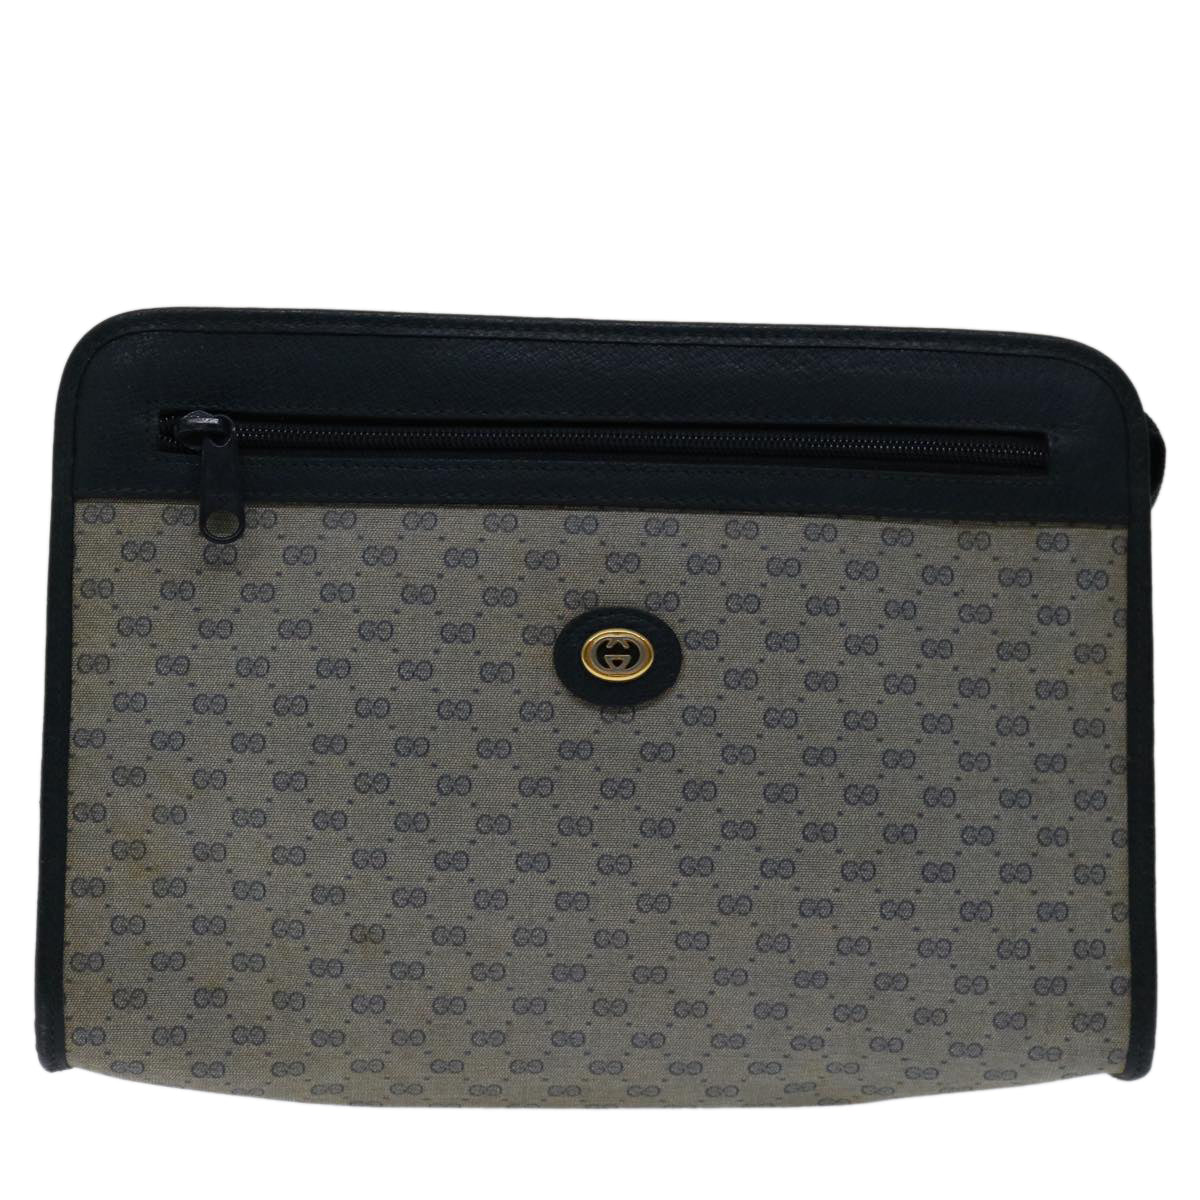 GUCCI Micro GG Supreme Clutch Bag PVC Leather Navy 97 01 037 Auth bs12751 - 0